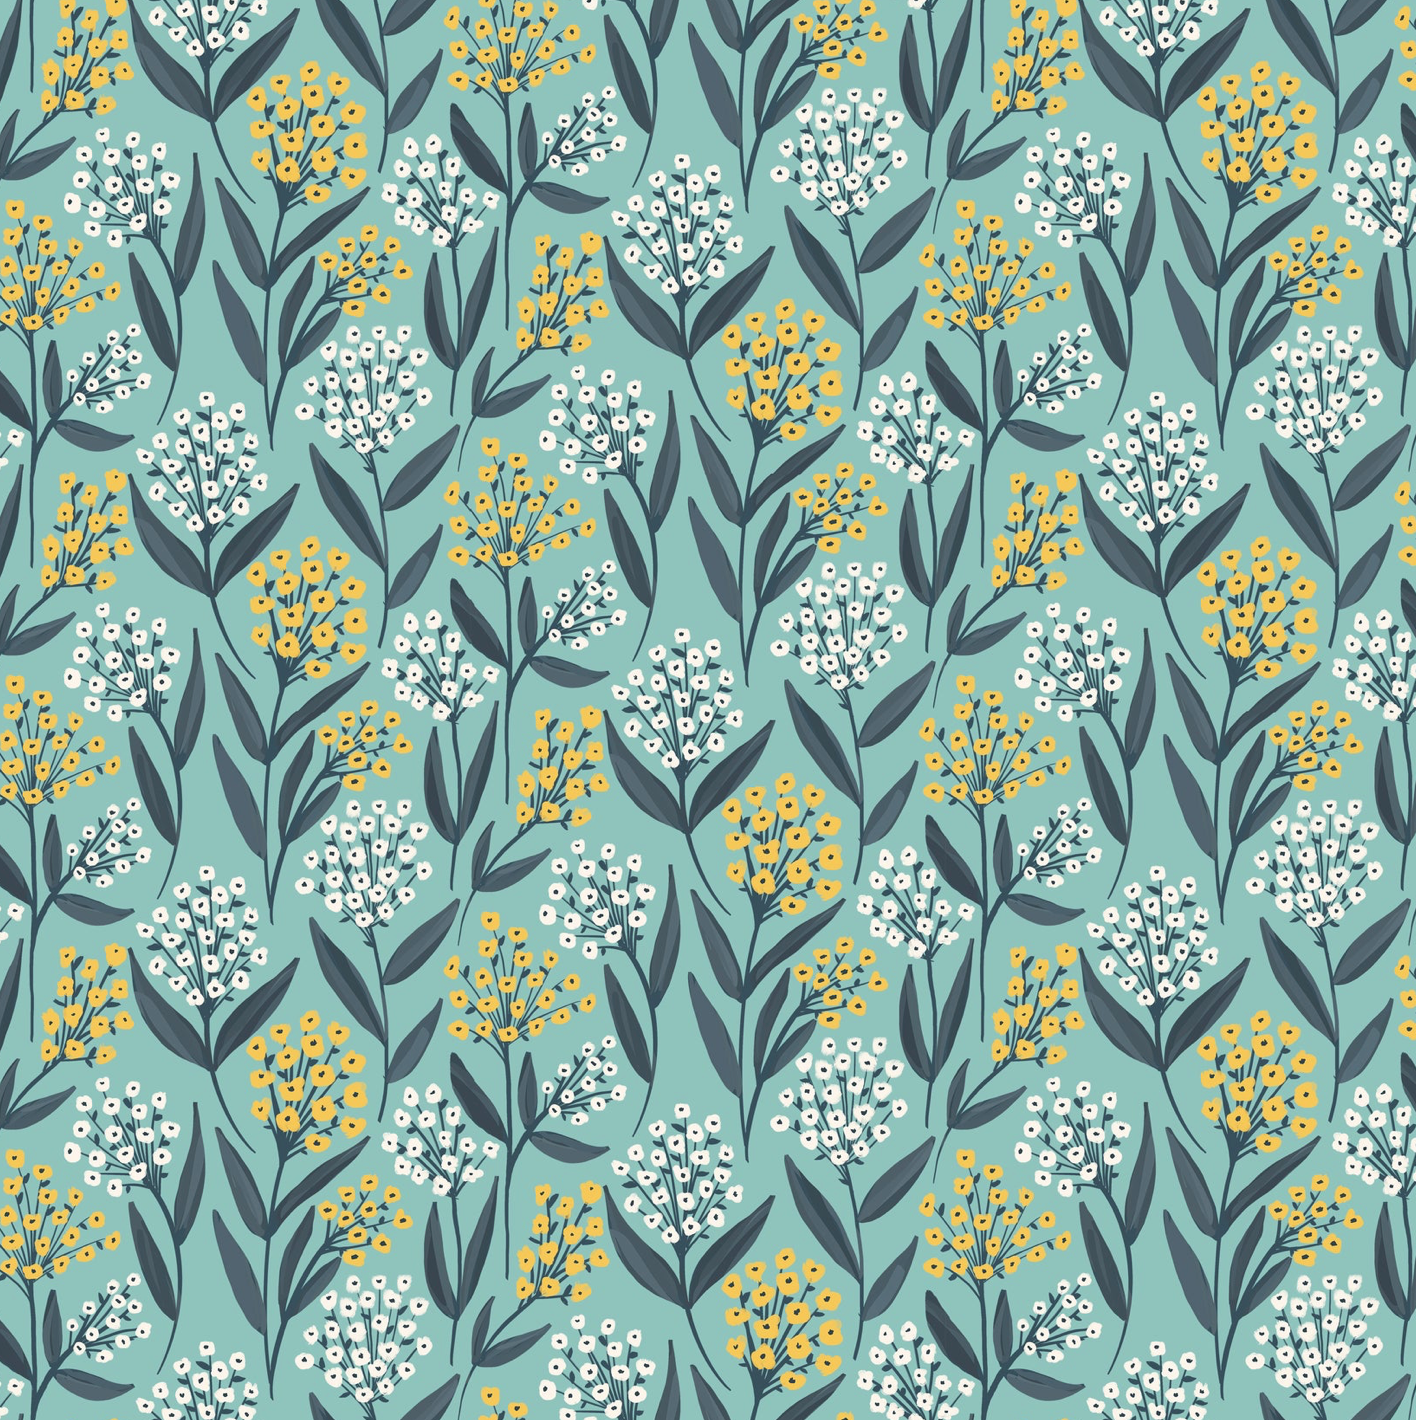 Painted Blossoms Barely Buds Teal PB24667, sold by the 1/2 yard, *PREORDER